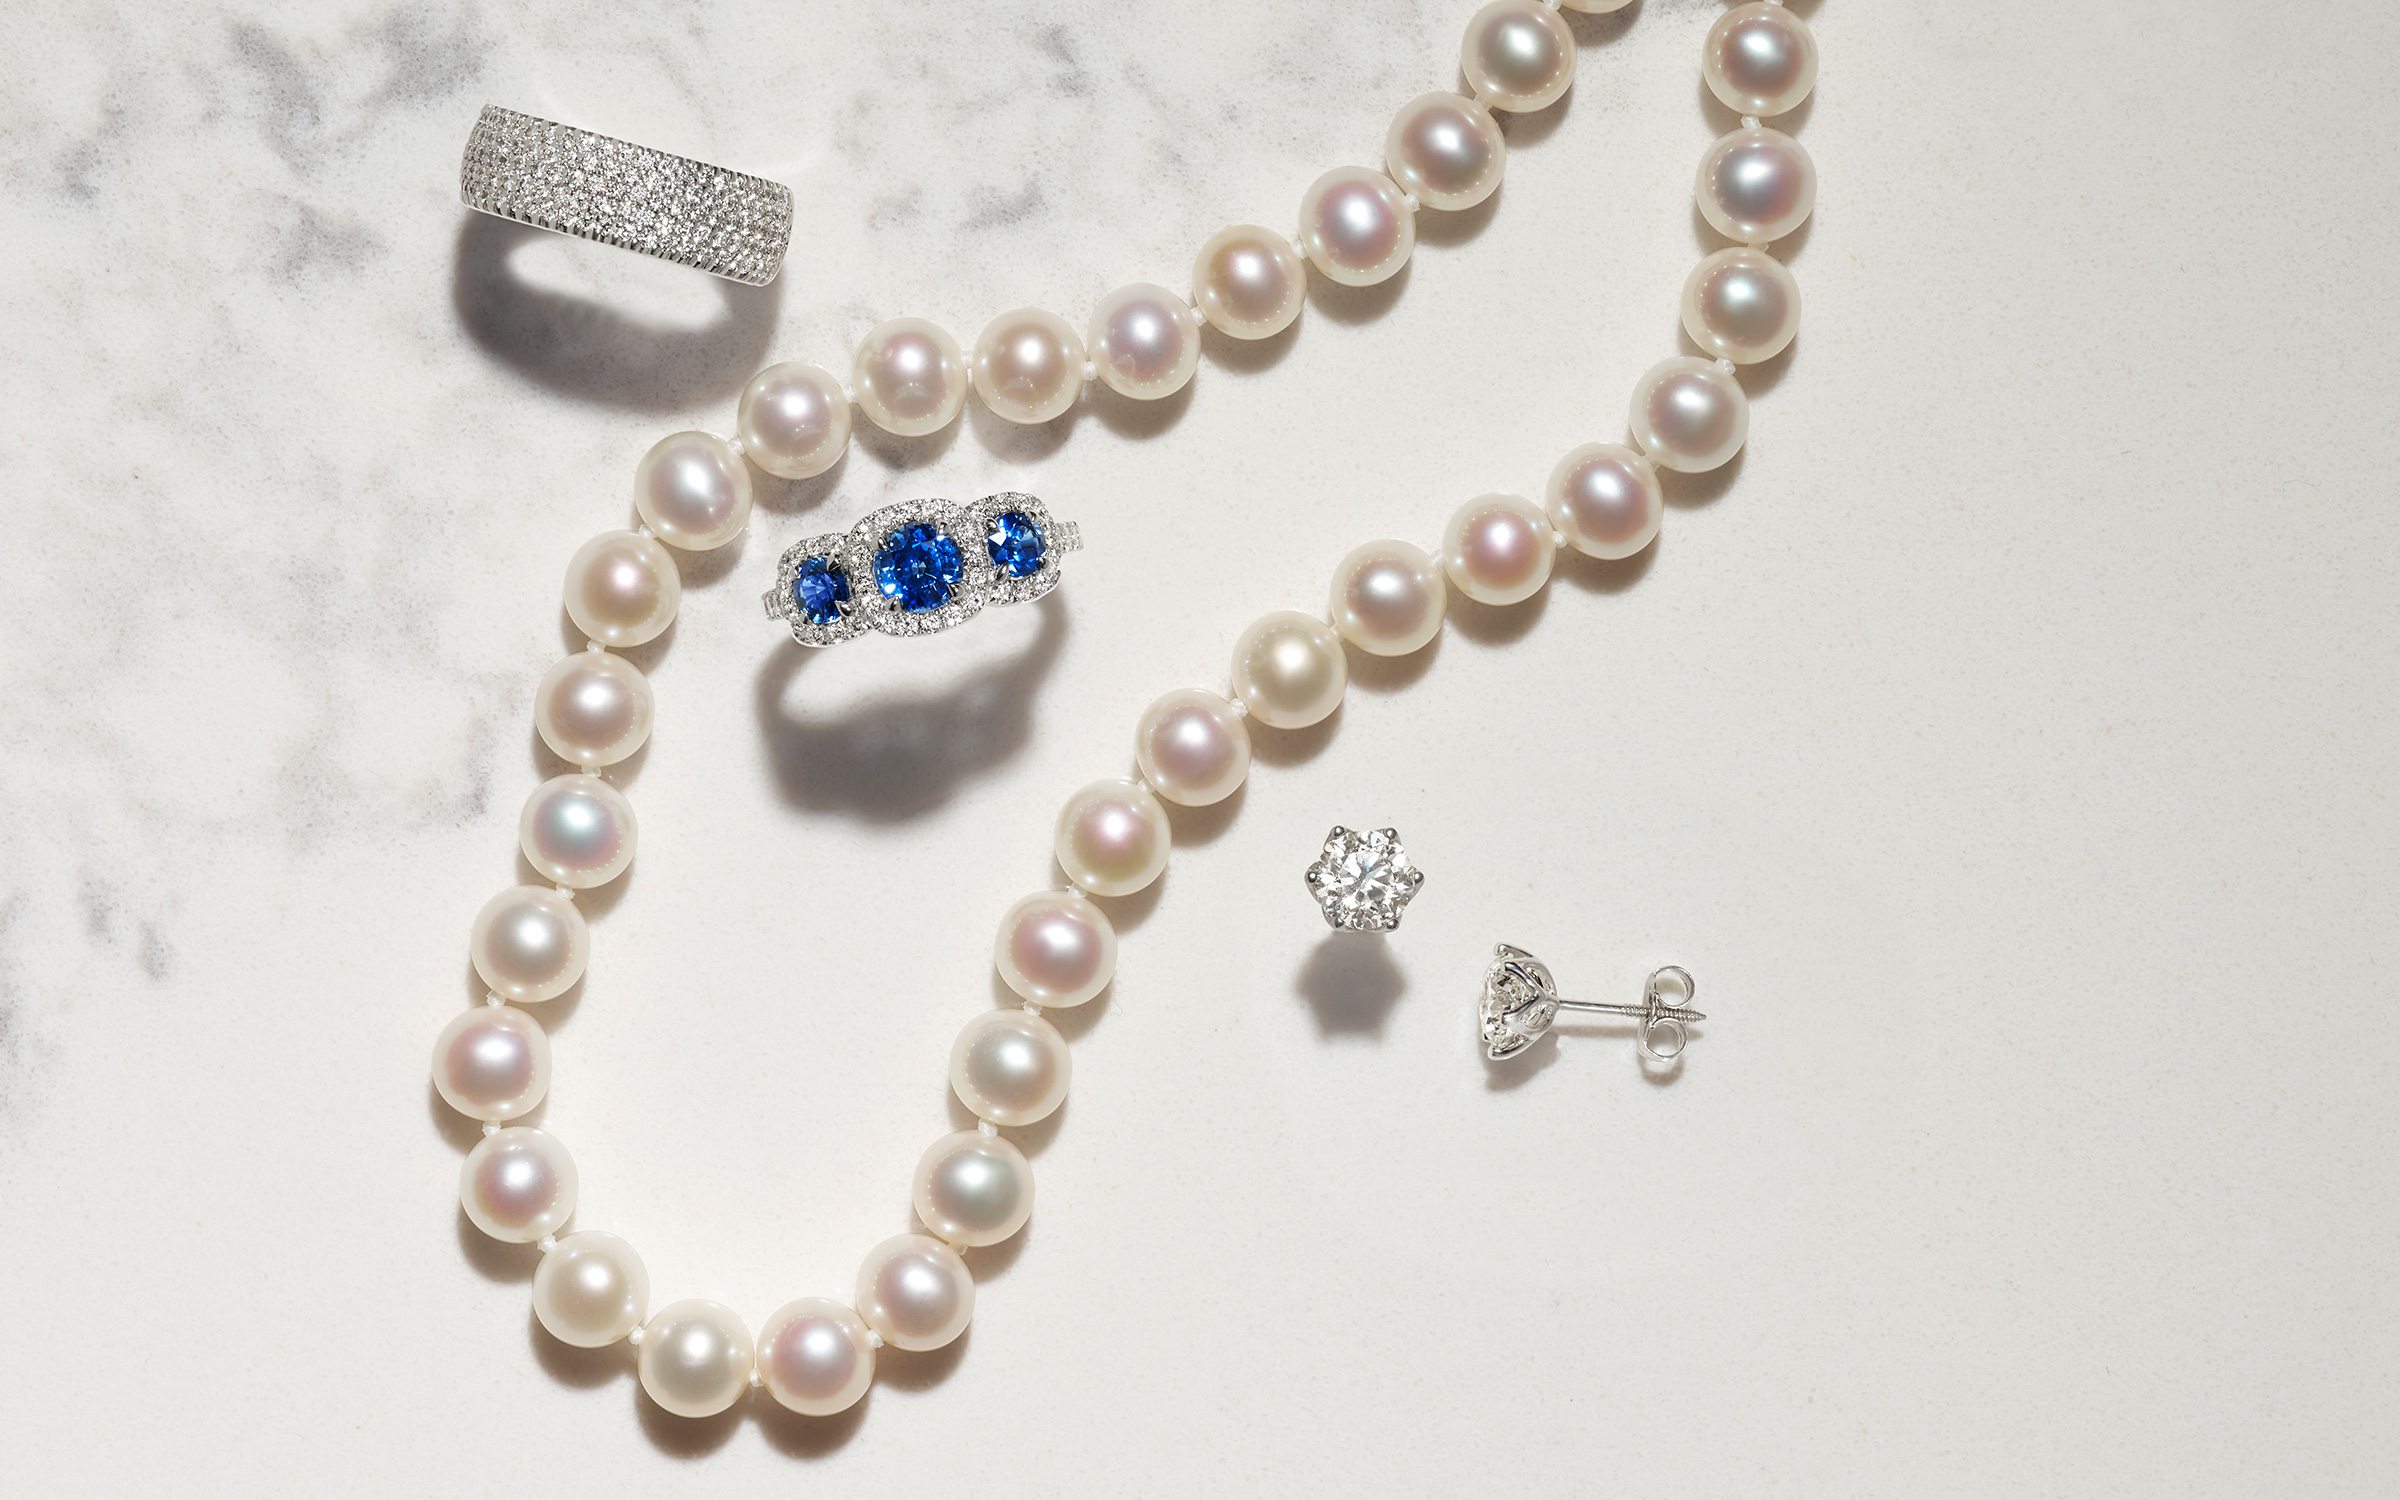 Pearl necklace, stud earrings, and two rings.